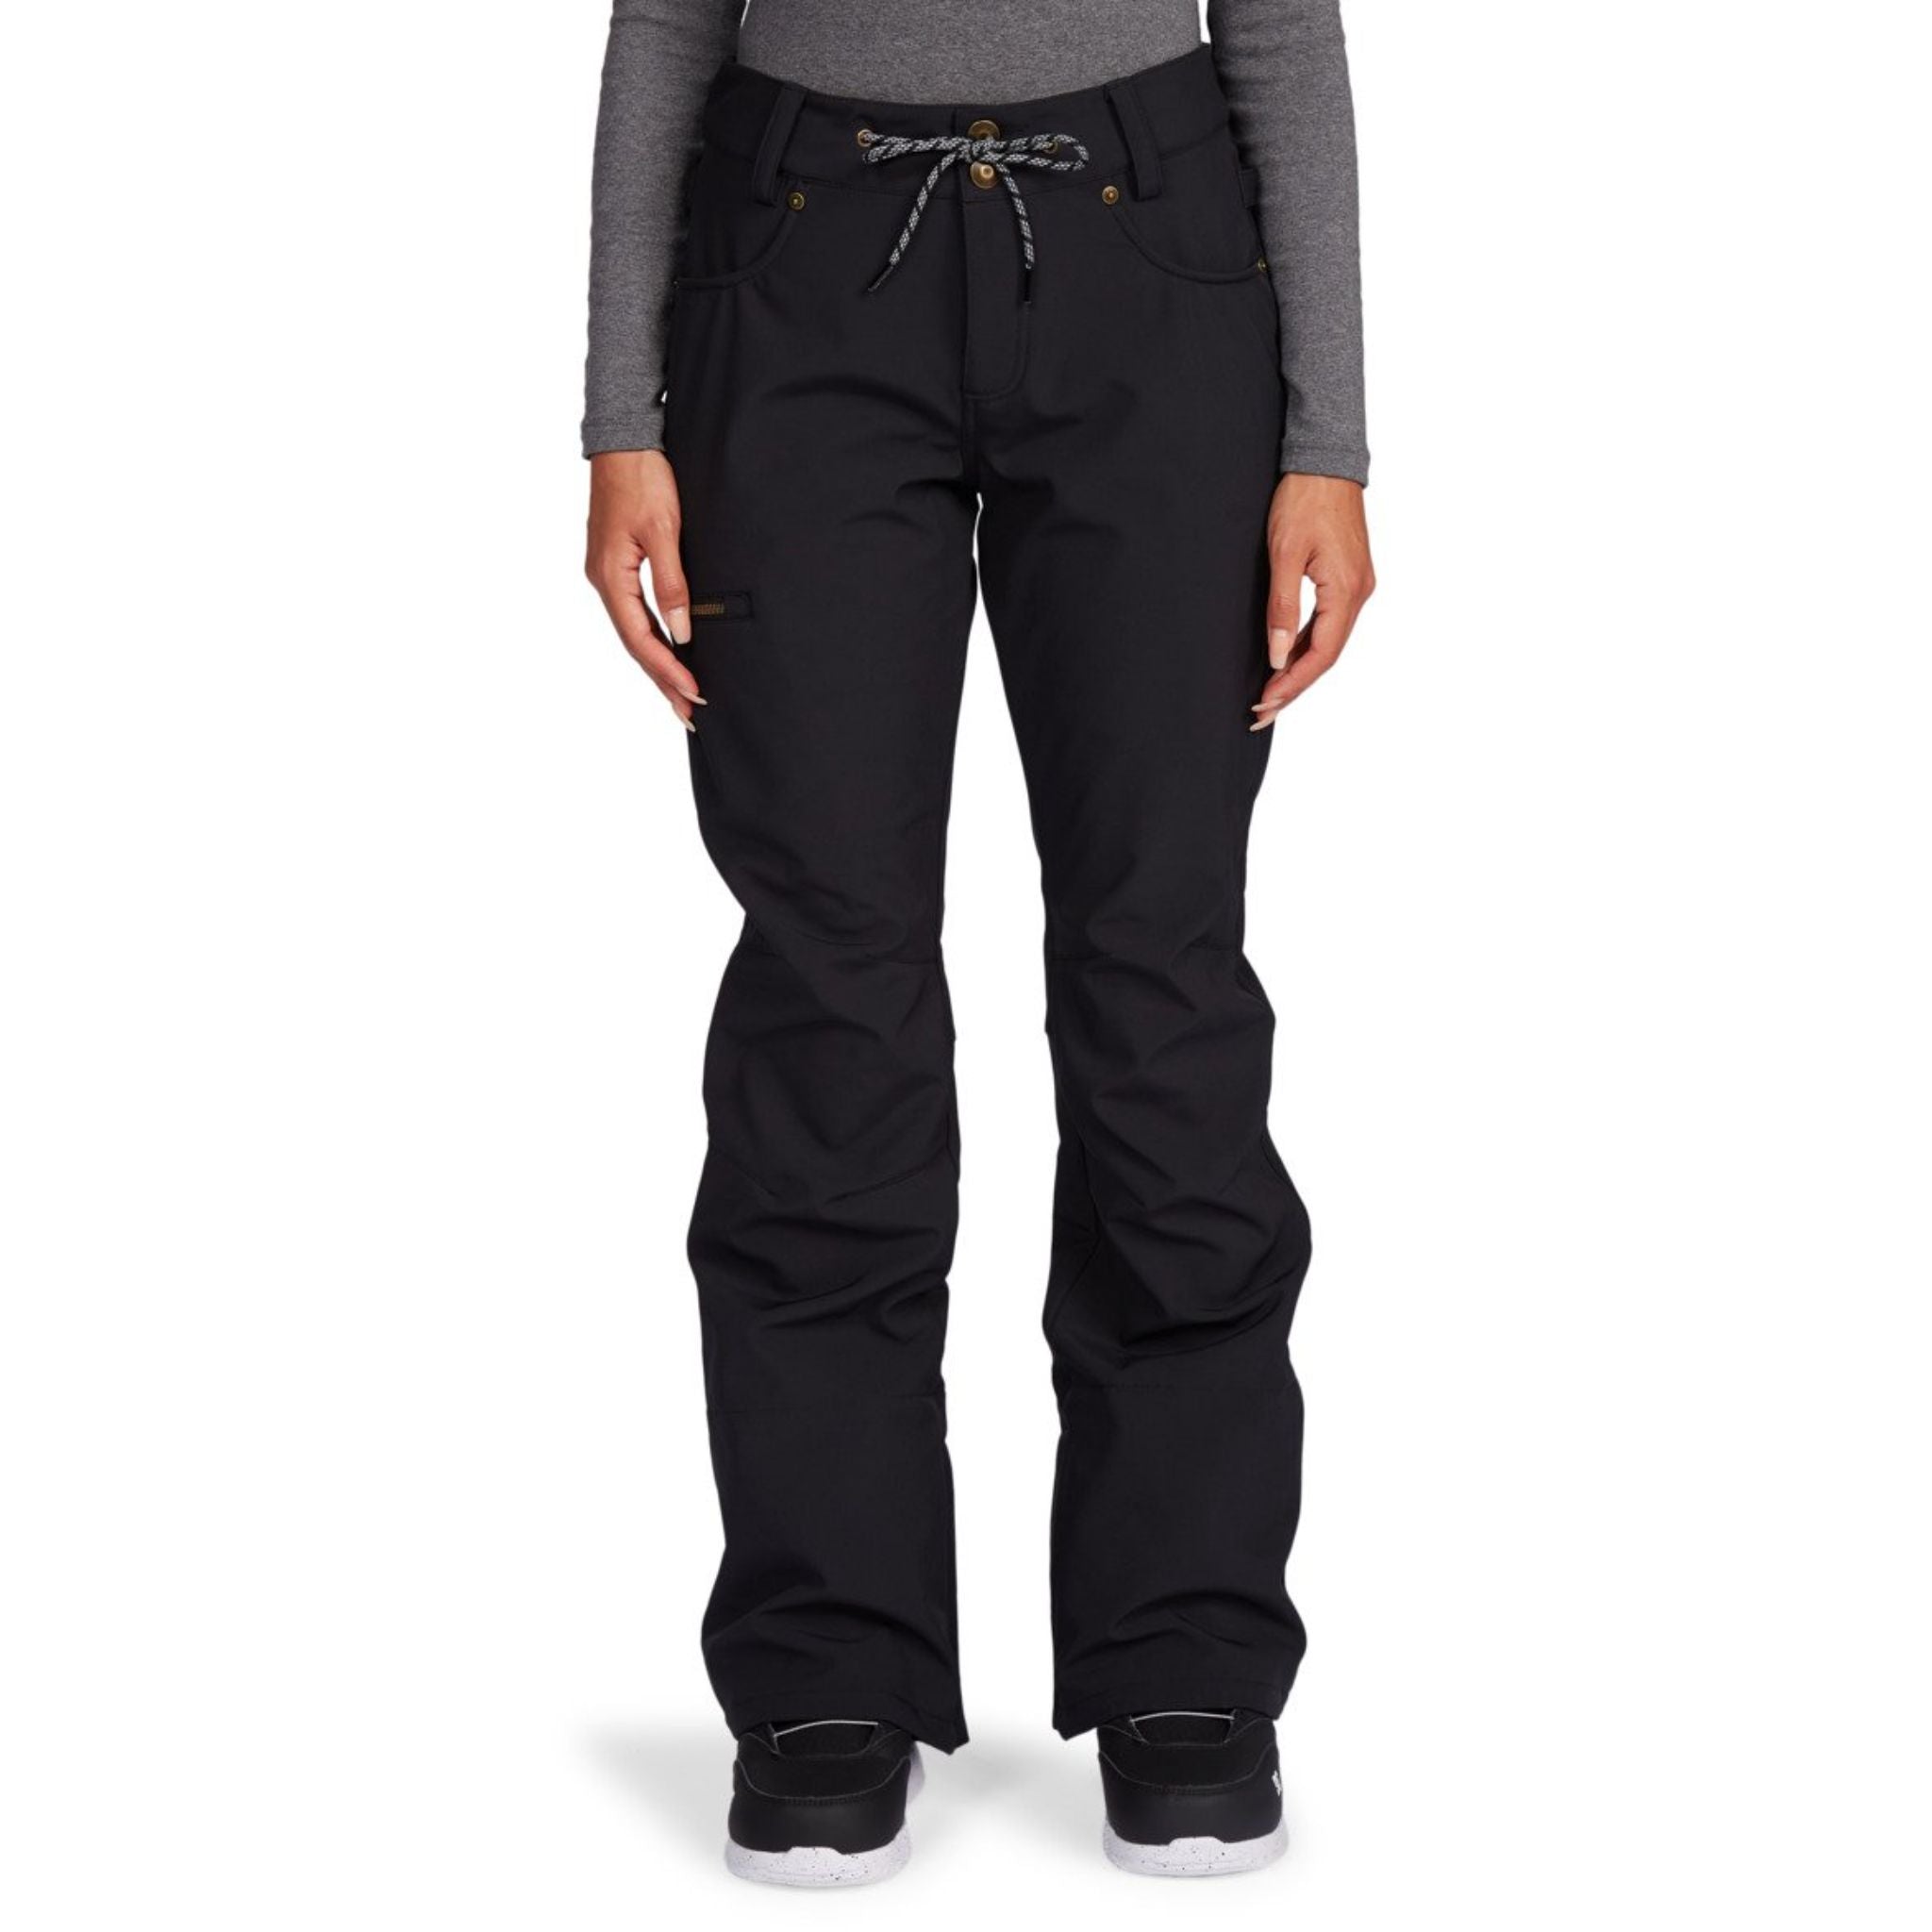 EXP Emily Women's Snow Pants, Assorted | Canadian Tire